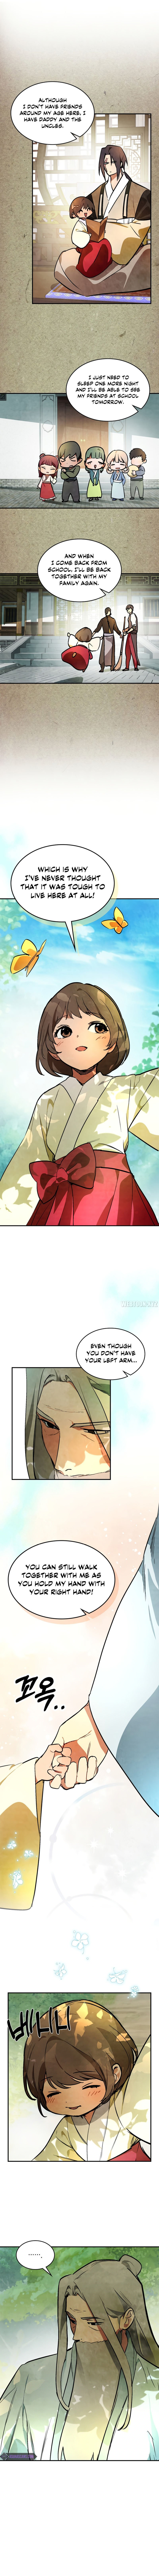 chronicles-of-the-martial-gods-return-chap-47-2